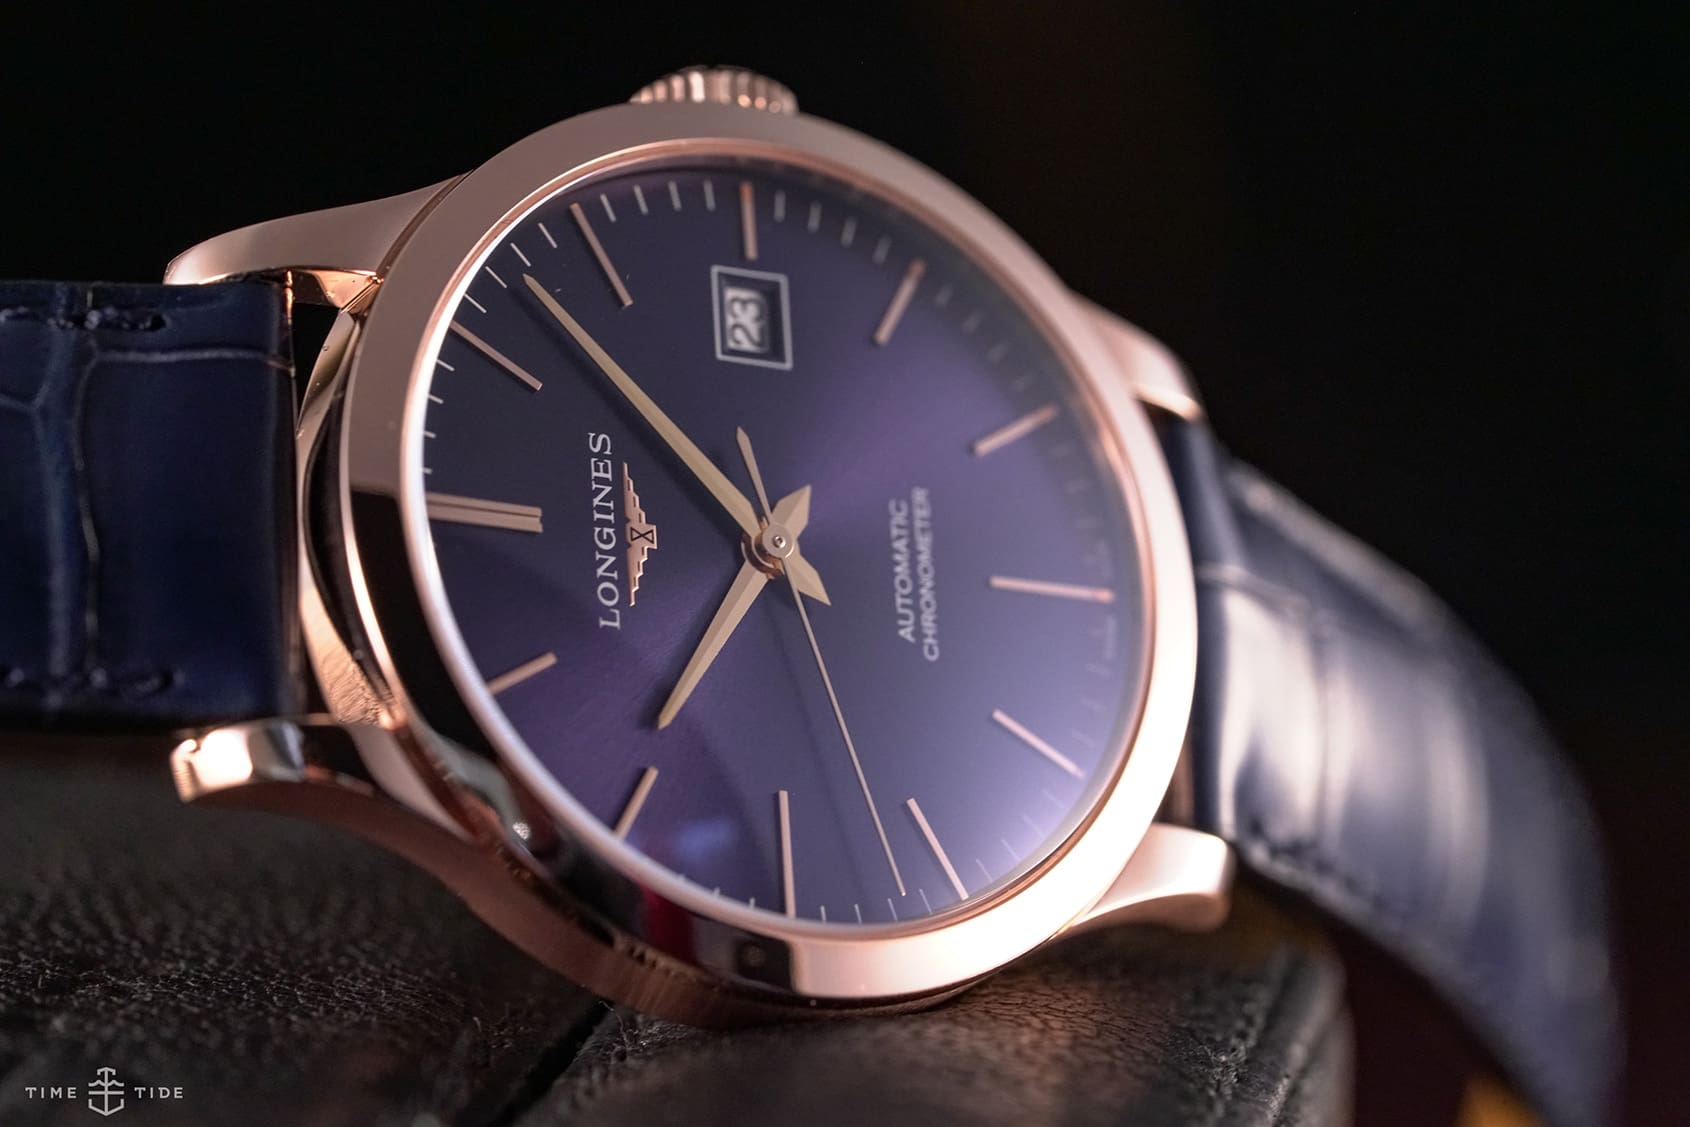 NEWS: Rose gold Longines Record nominated for the Petite Aiguille at the GPHG